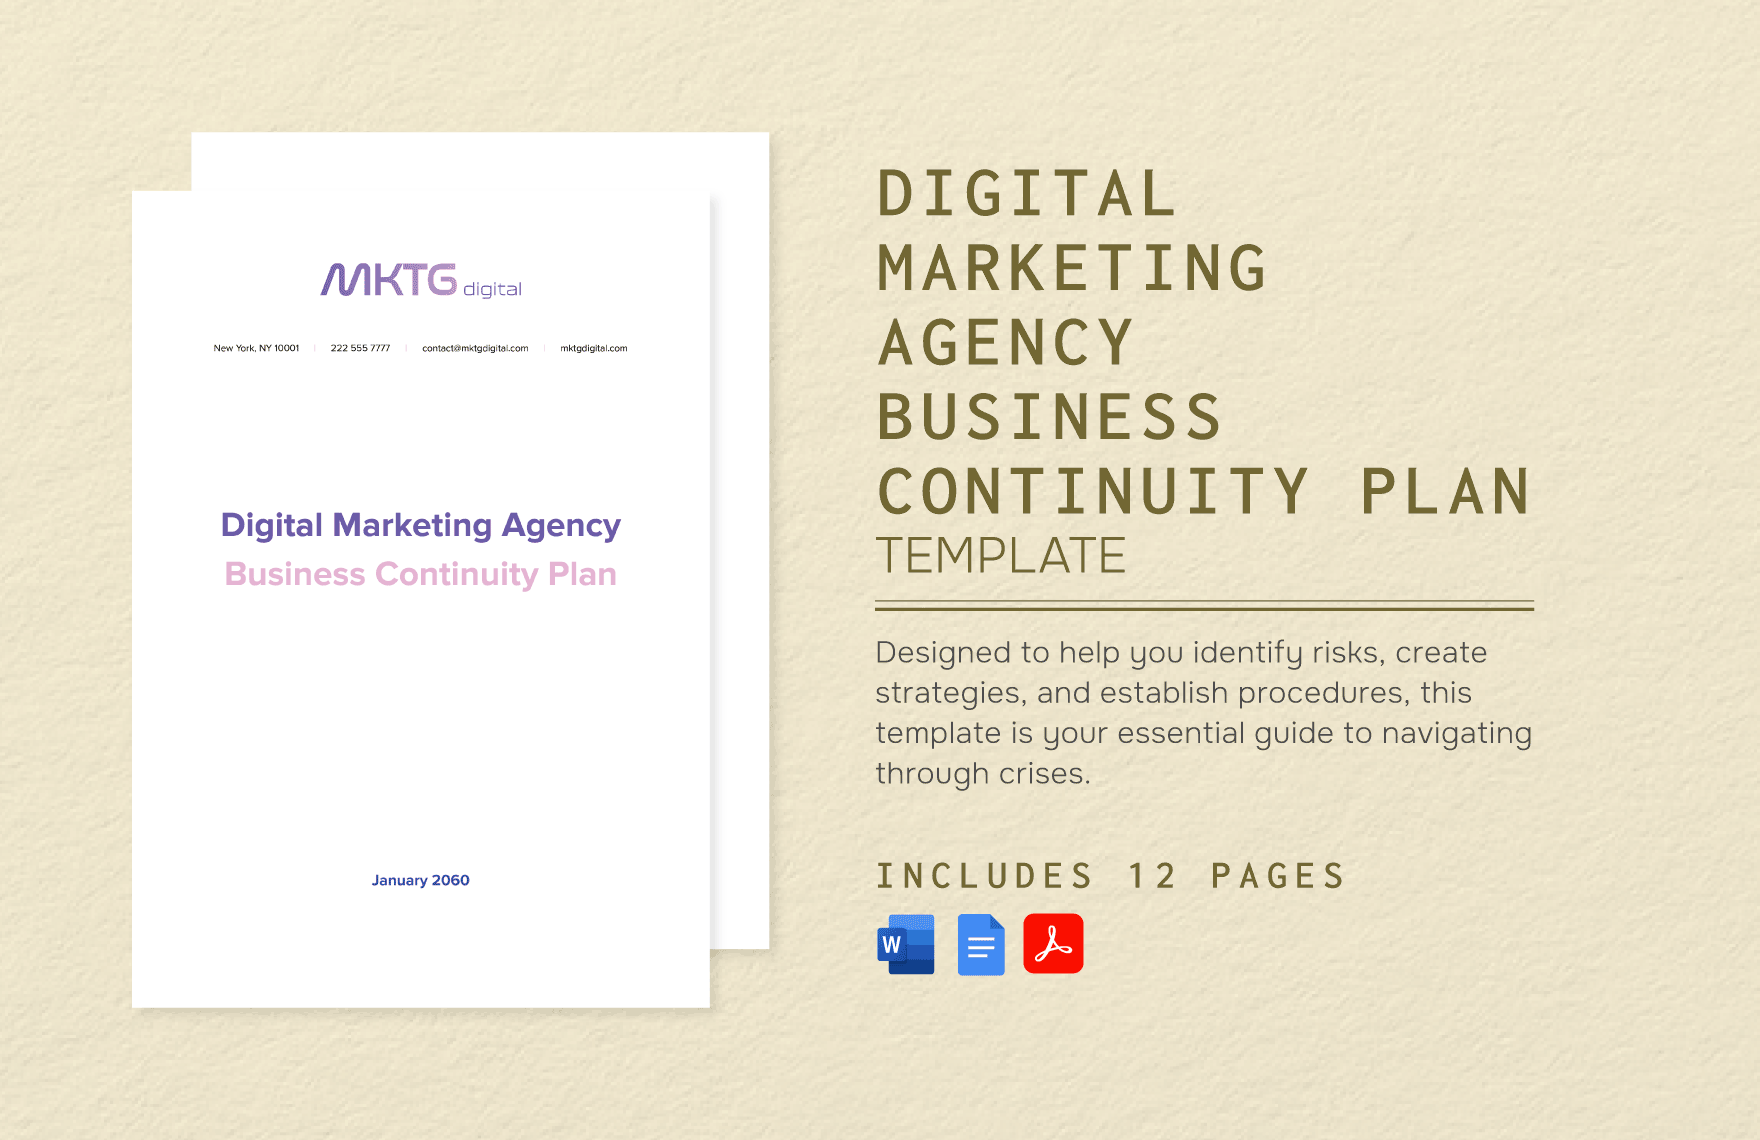 Digital Marketing Agency Business Continuity Plan Template